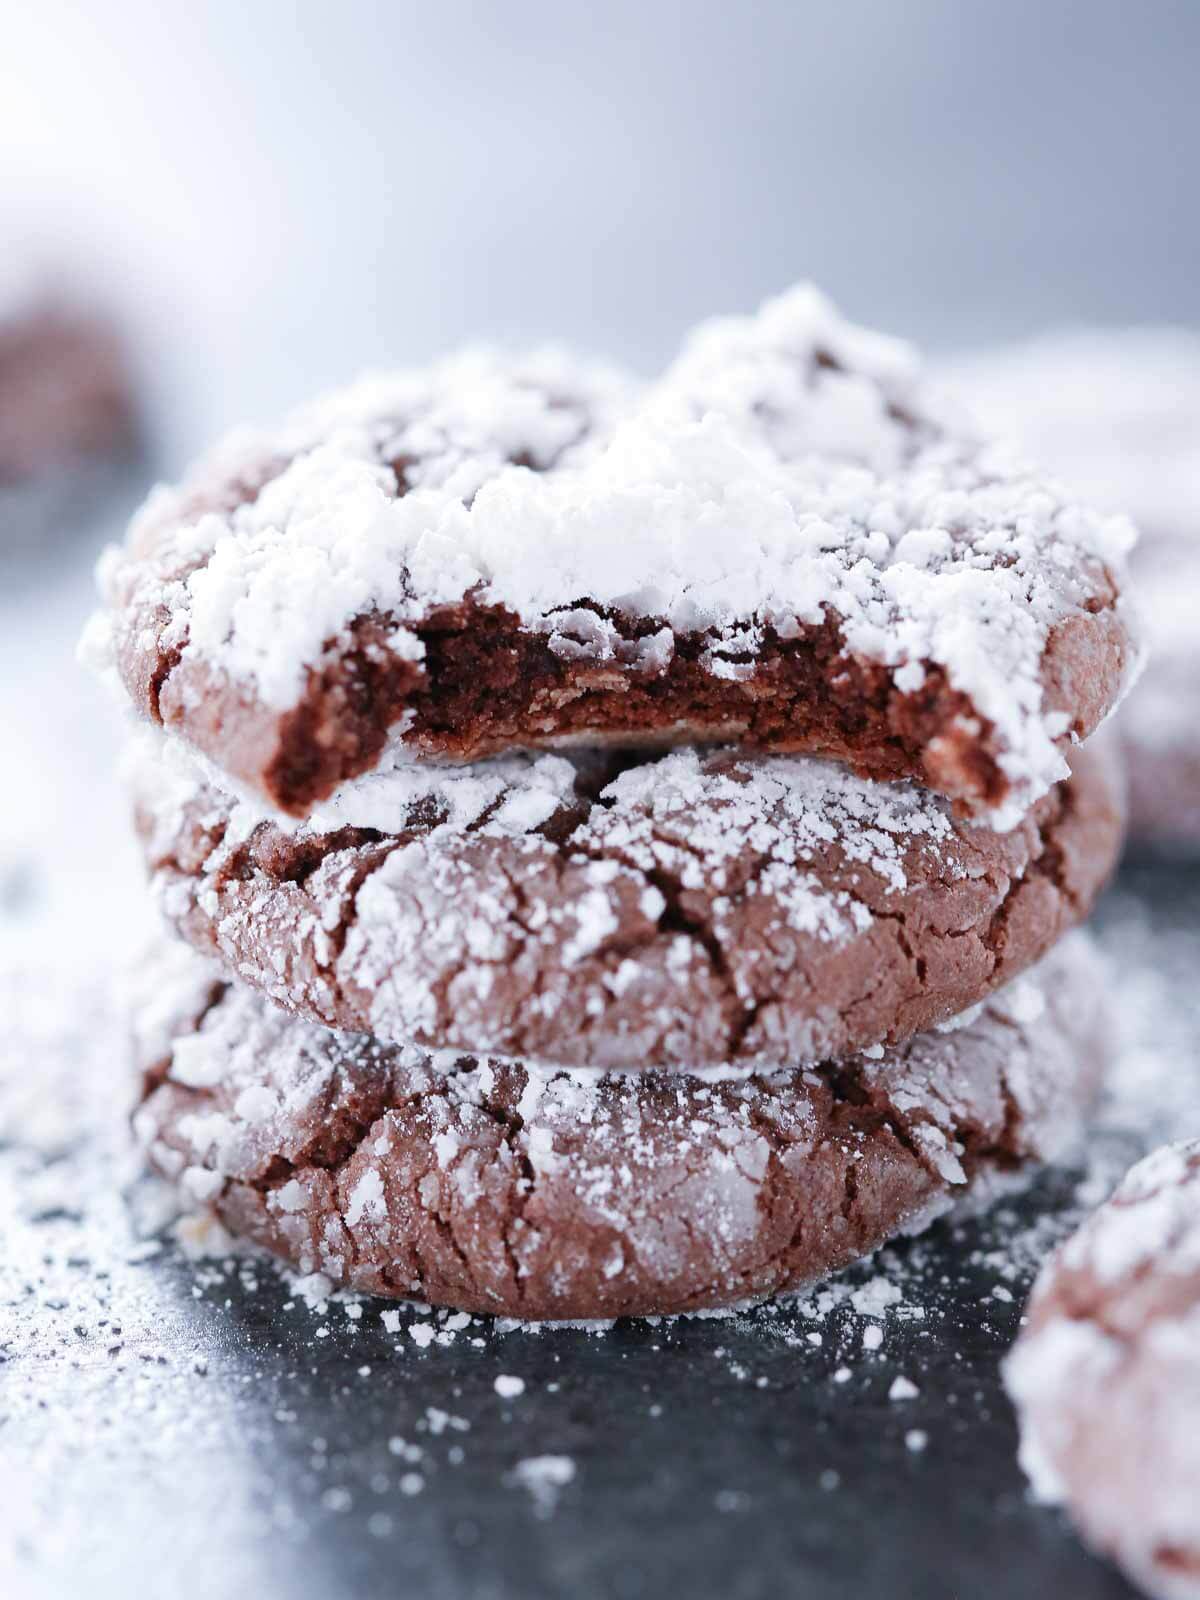 Easy chocolate dessert of chocolate crinkle cookies in a stack with the top one bitten.